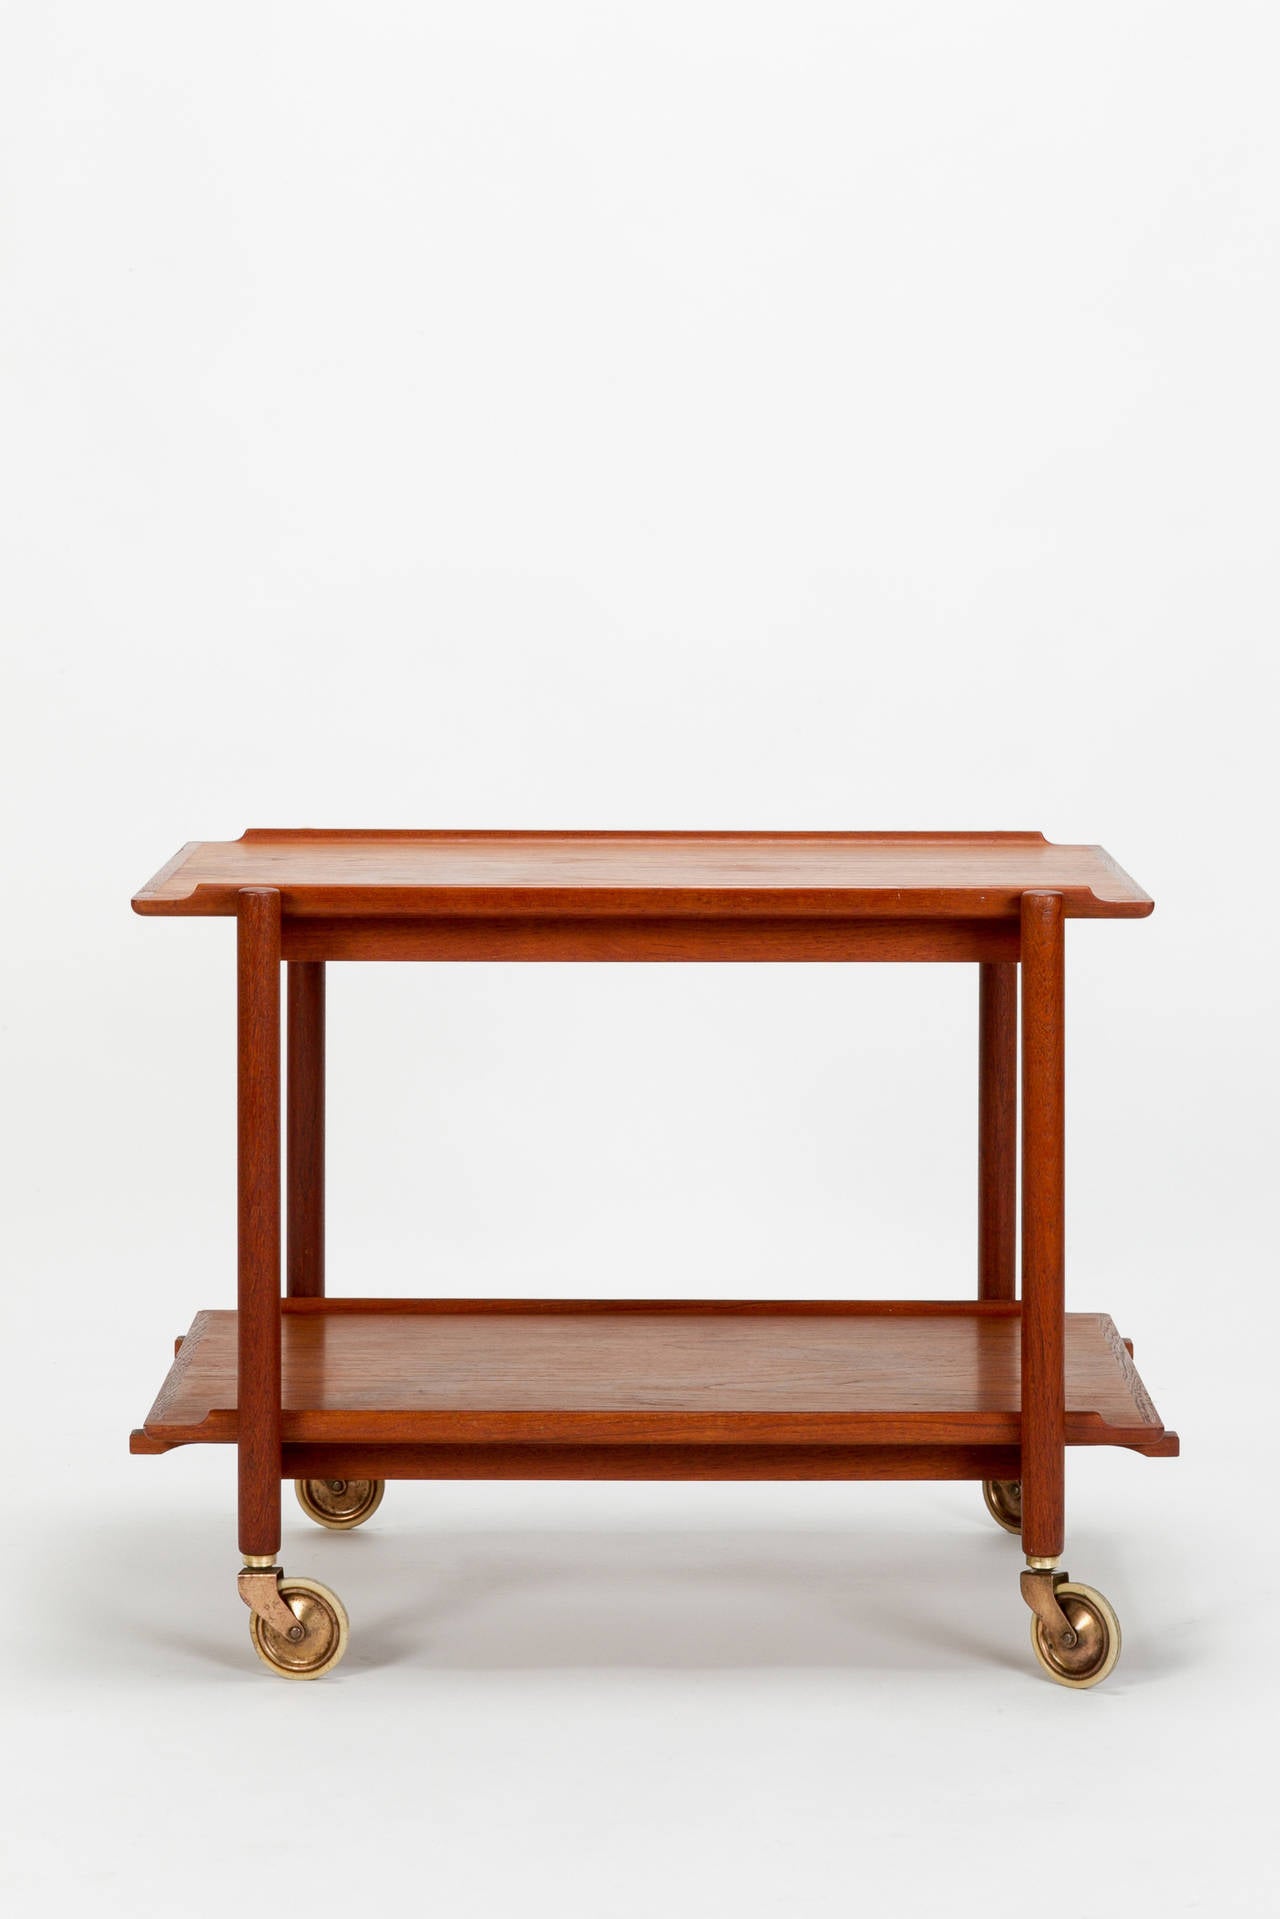 Lovely teak wood bar cart by Poul Hundevad, in Denmark 1960s. Made of a solid teak frame and two shelves, elegant and simple shape with beautiful details! The bottom shelf can be placed next to the top shelf to generate a bigger shelf space.